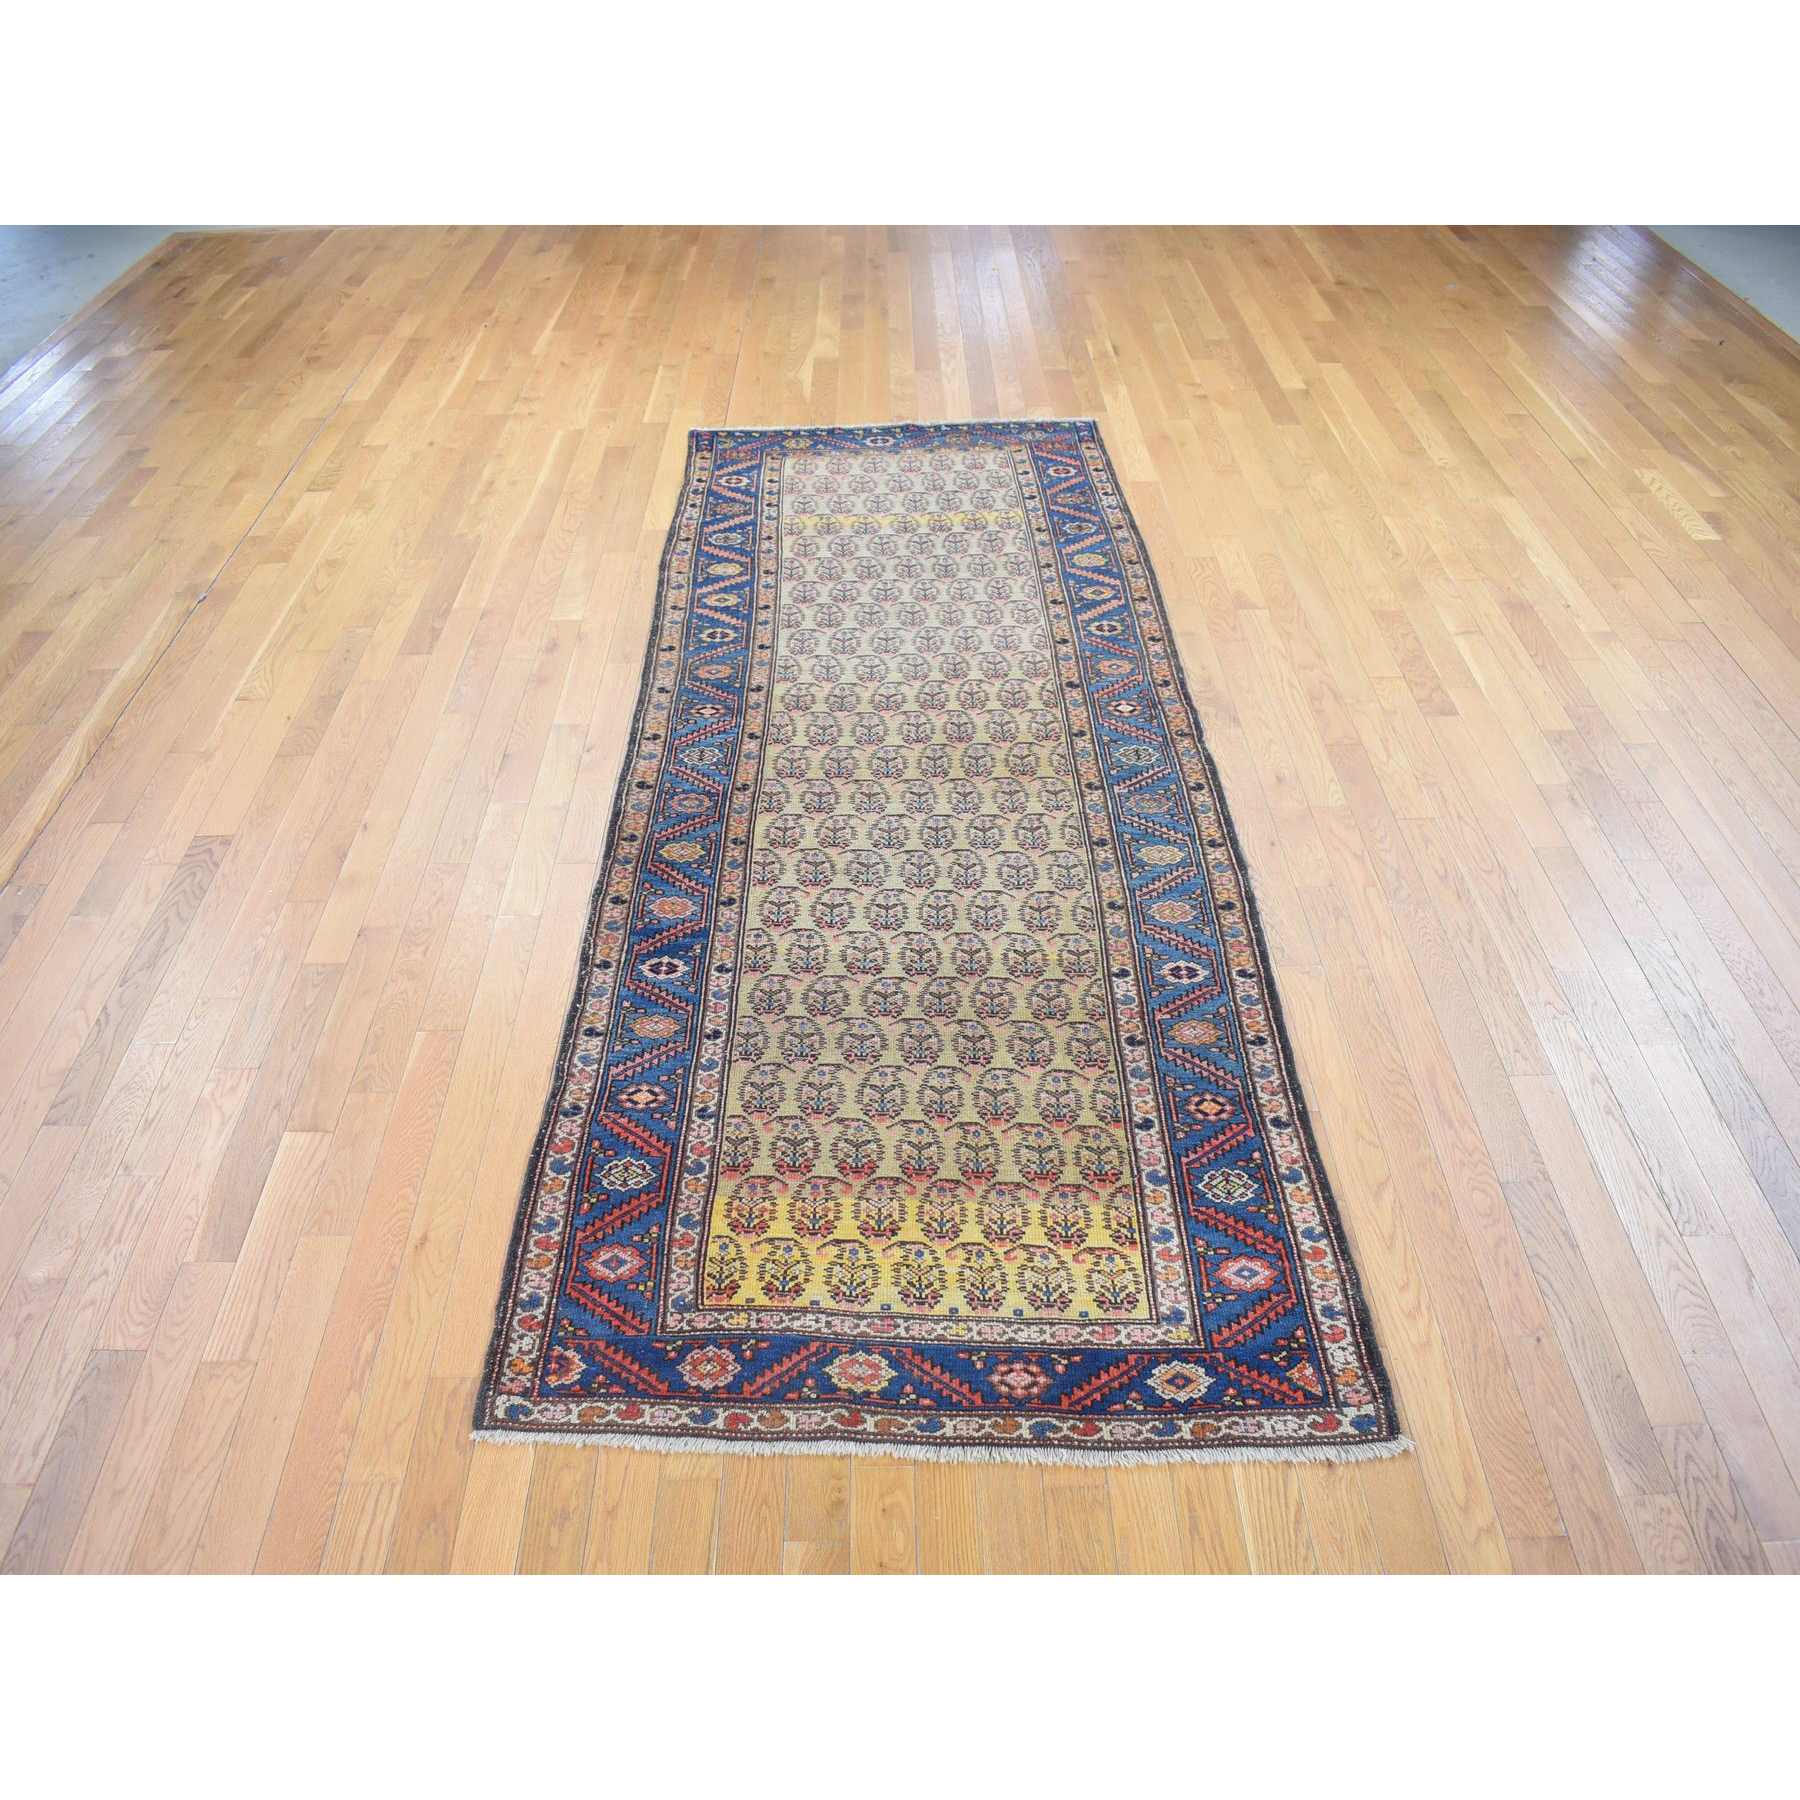 Antique-Hand-Knotted-Rug-400290